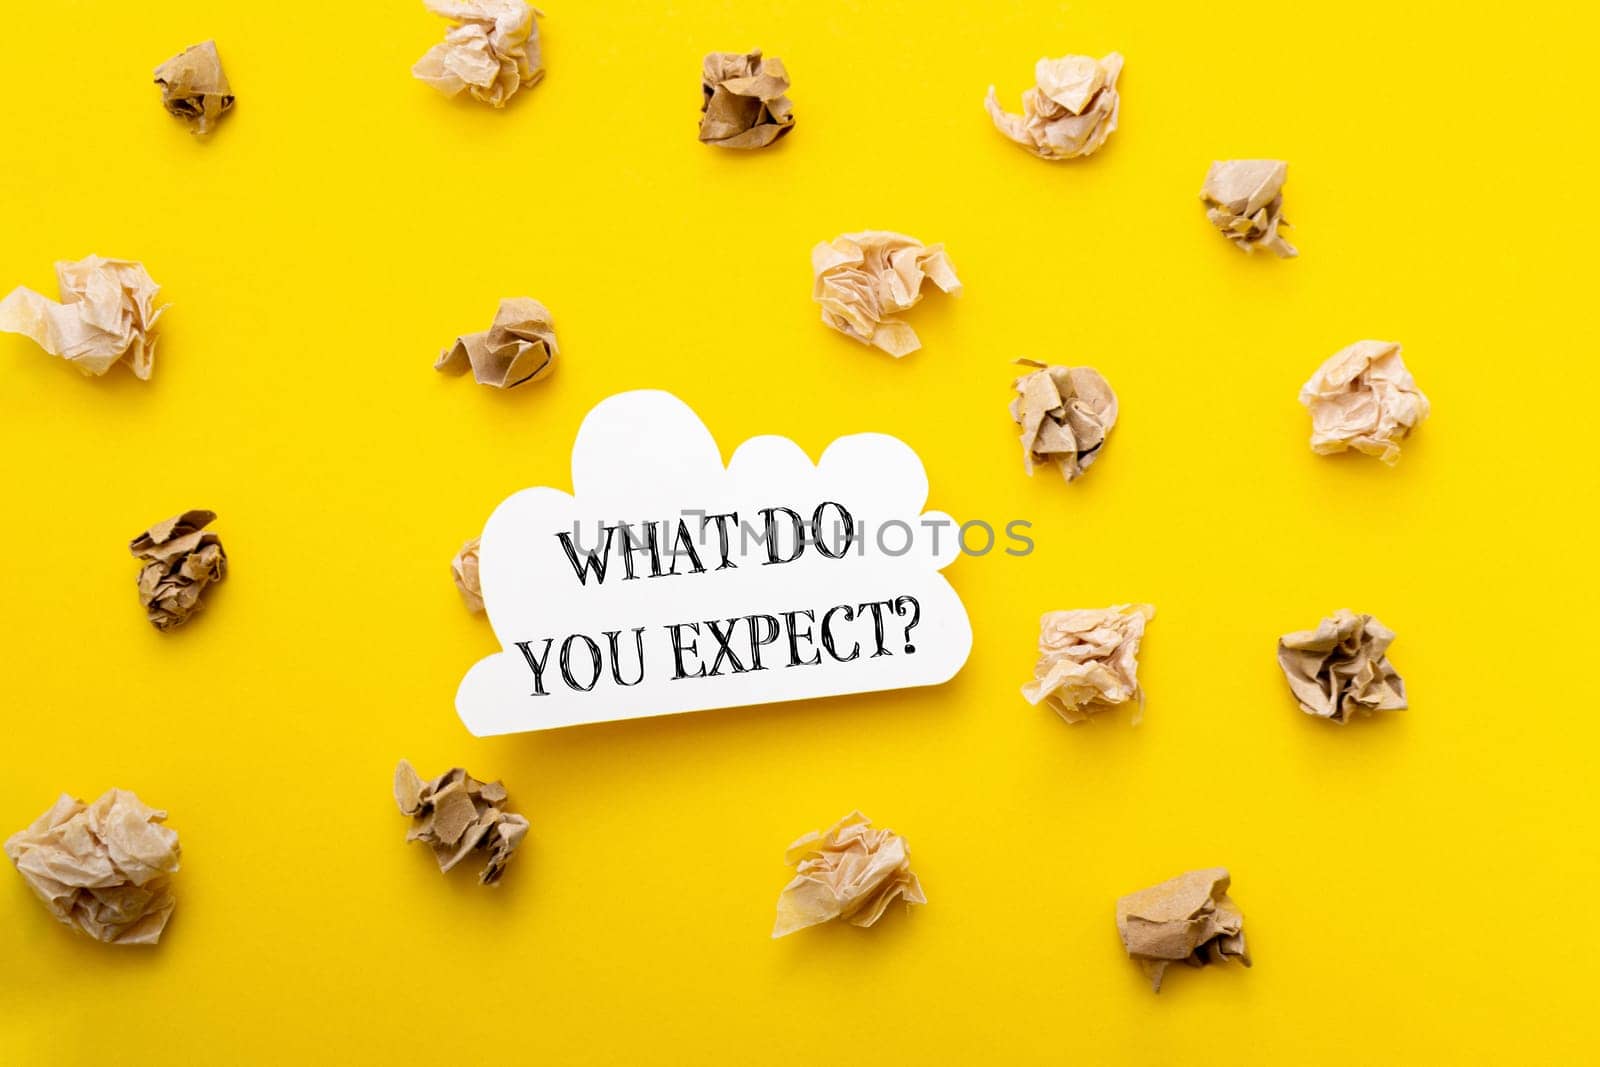 A yellow background with a white sign that says What do you expect. The sign is surrounded by shredded paper, giving the impression of a chaotic or disorganized environment